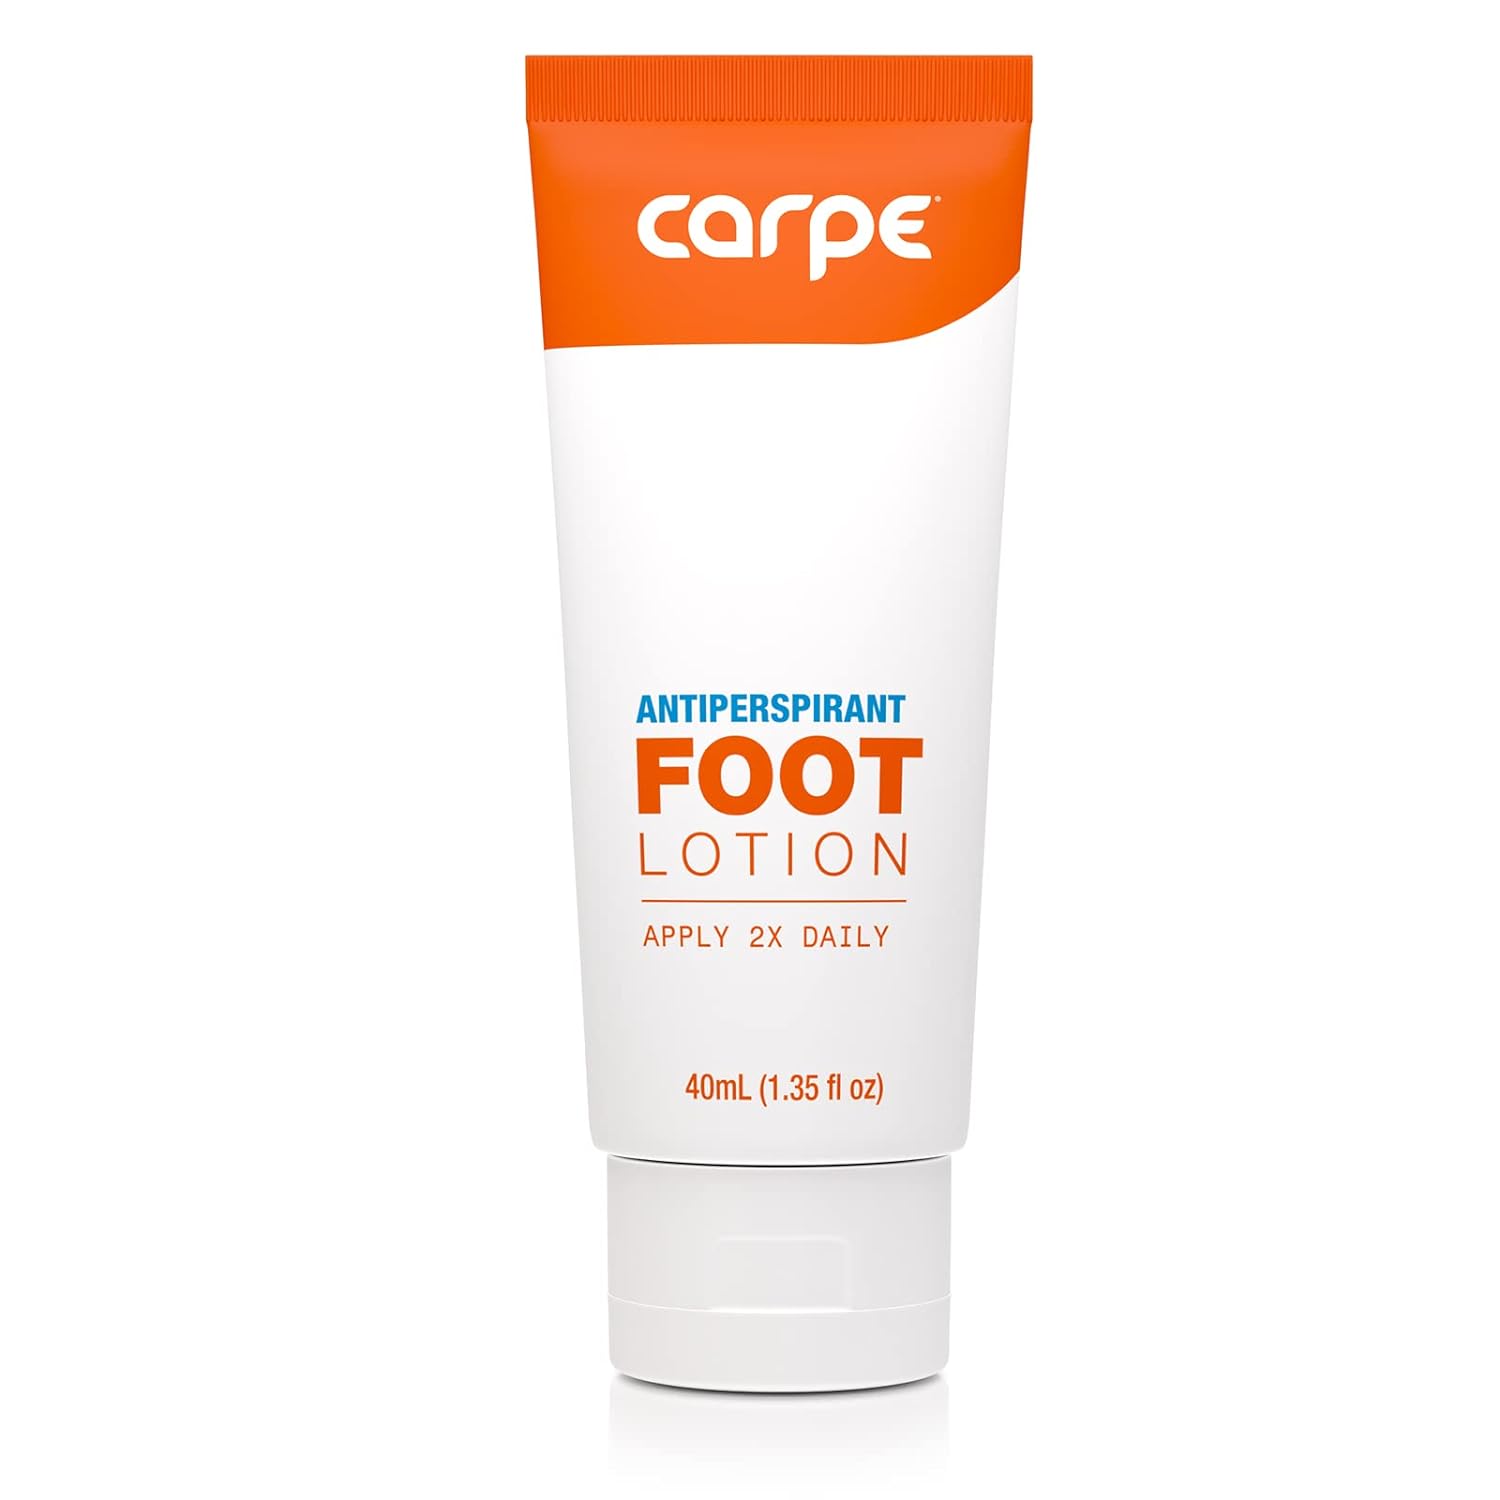 Carpe Antiperspirant Hand and Foot Lotion Package Deal (1 Hand and 1 Foot Tube - Save 17%), Stop Sweaty Hands and Sweaty, Smelly Feet, Dermatologist-Recommended, Most-Popular : Beauty & Personal Care